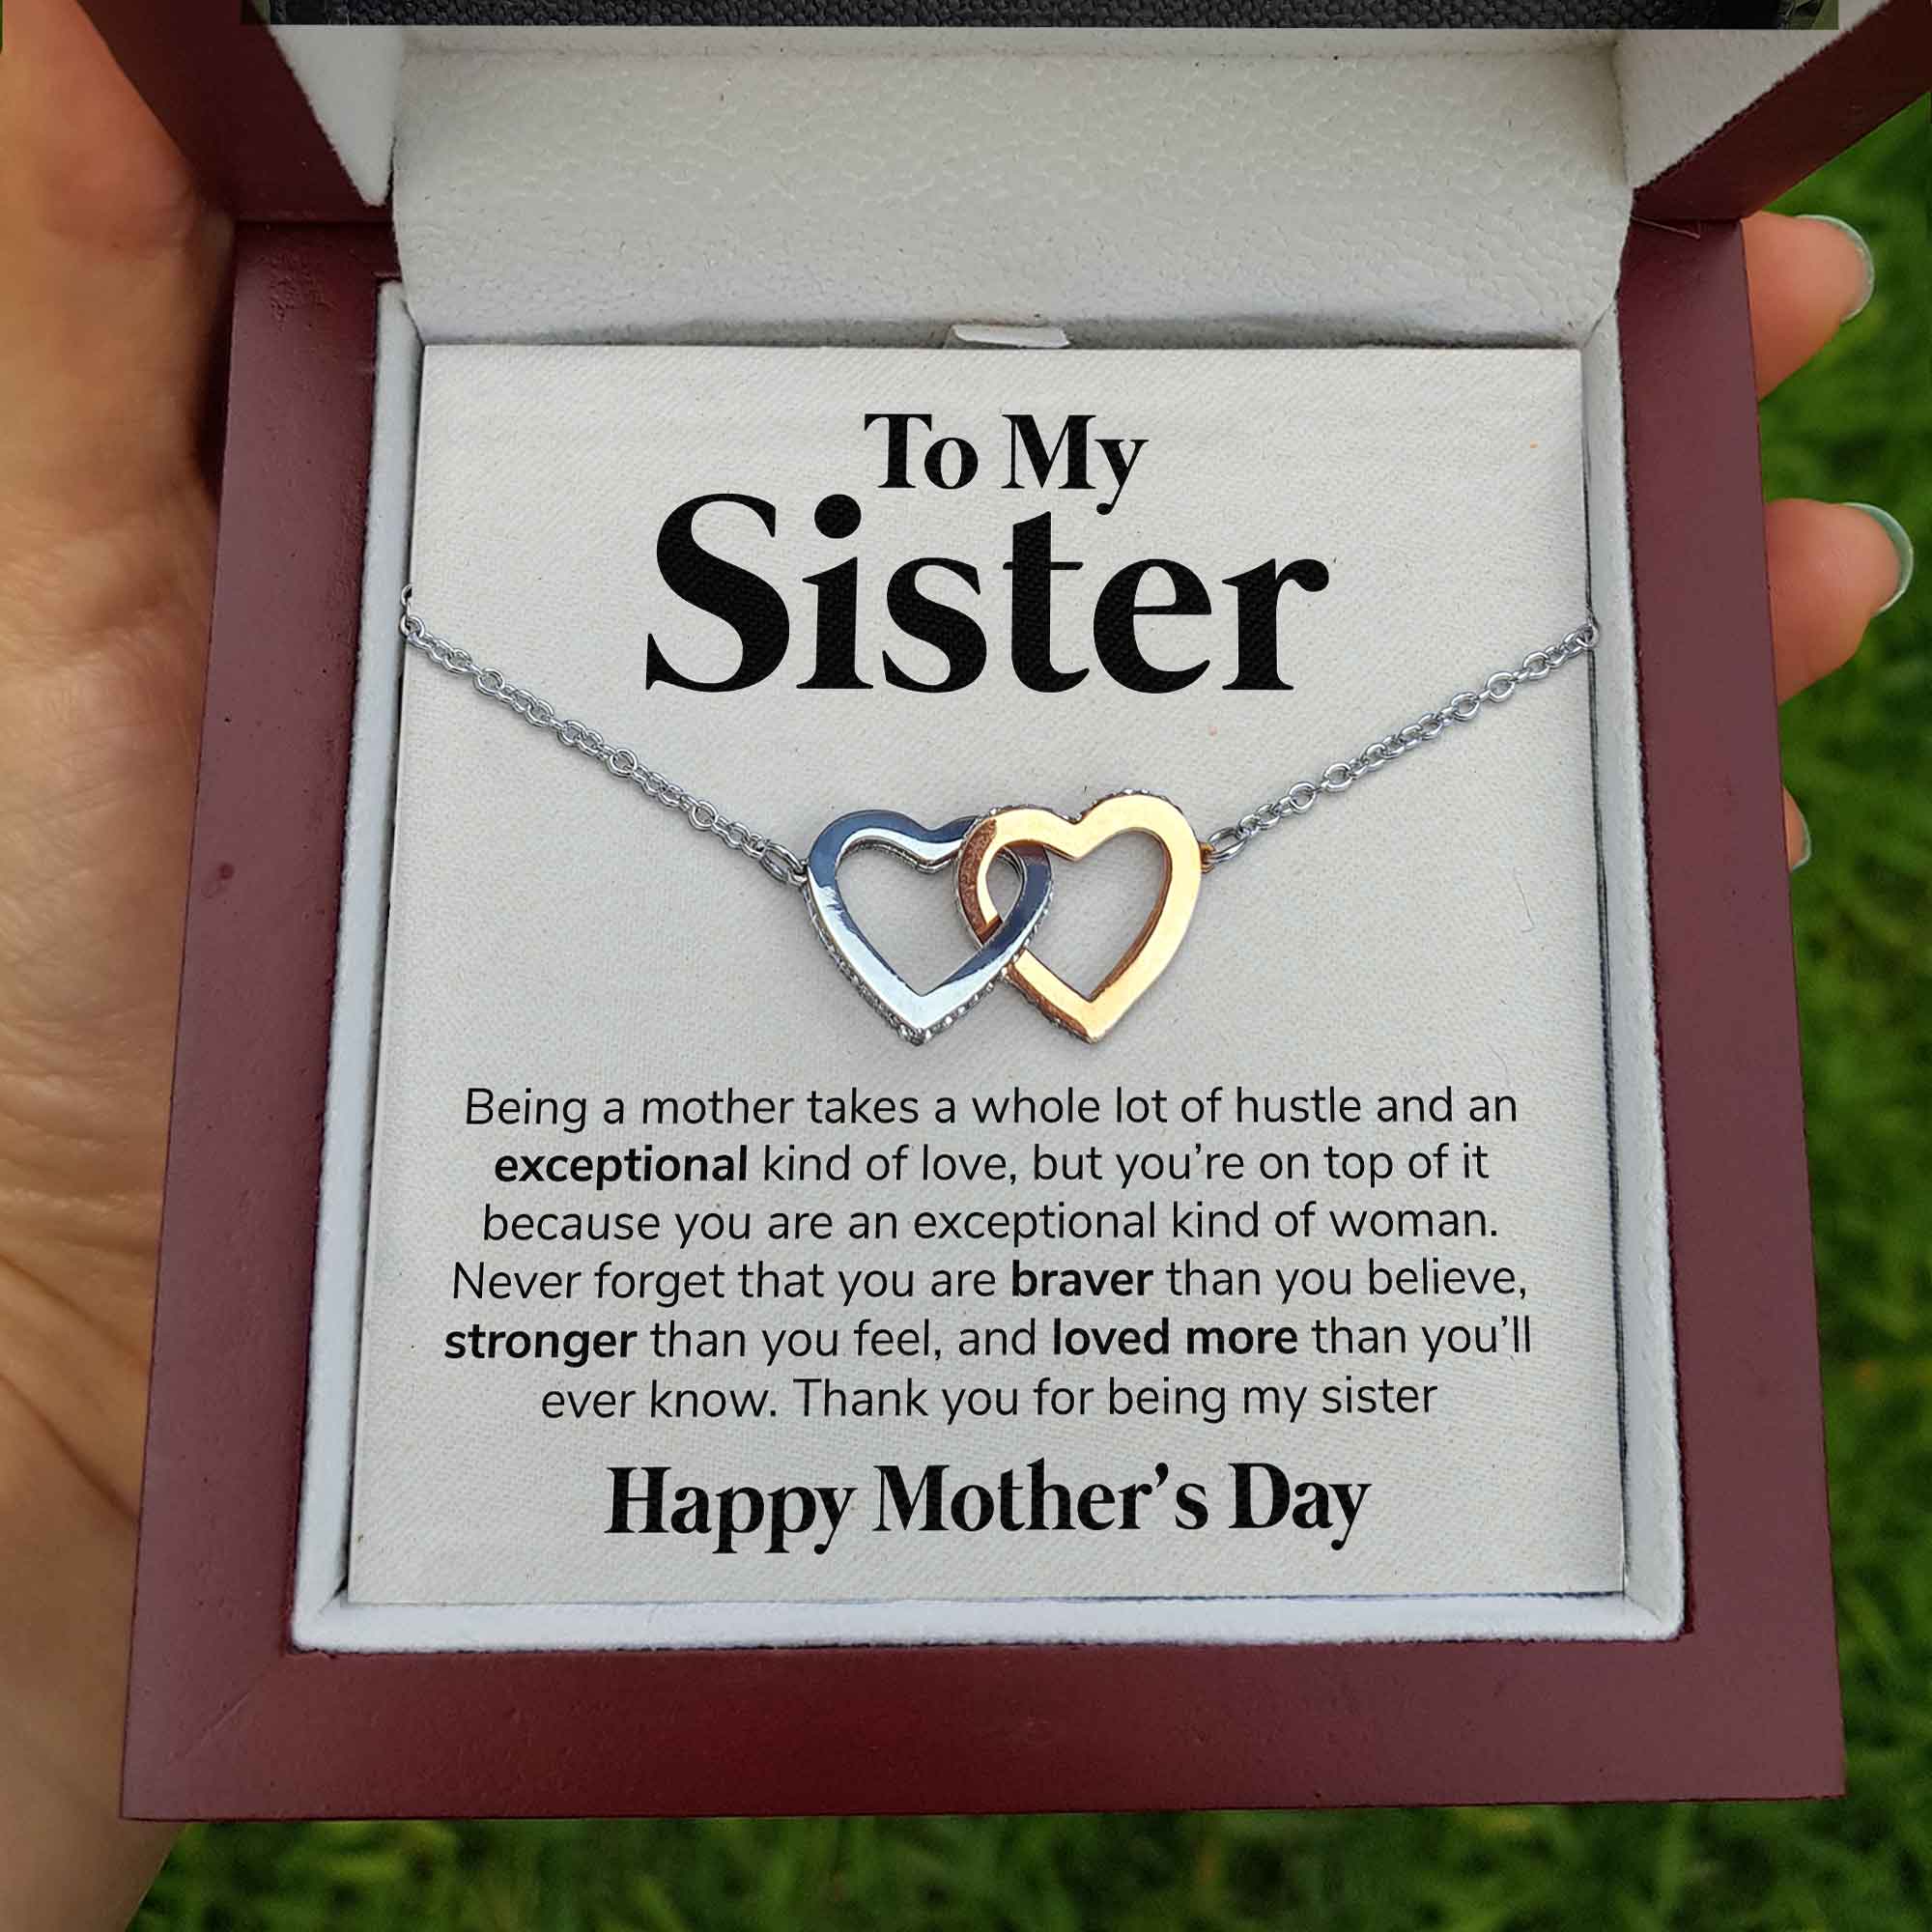 ShineOn Fulfillment Jewelry Standard Box To My Sister - Exceptional Kind of Love - Interlocking Hearts Necklace